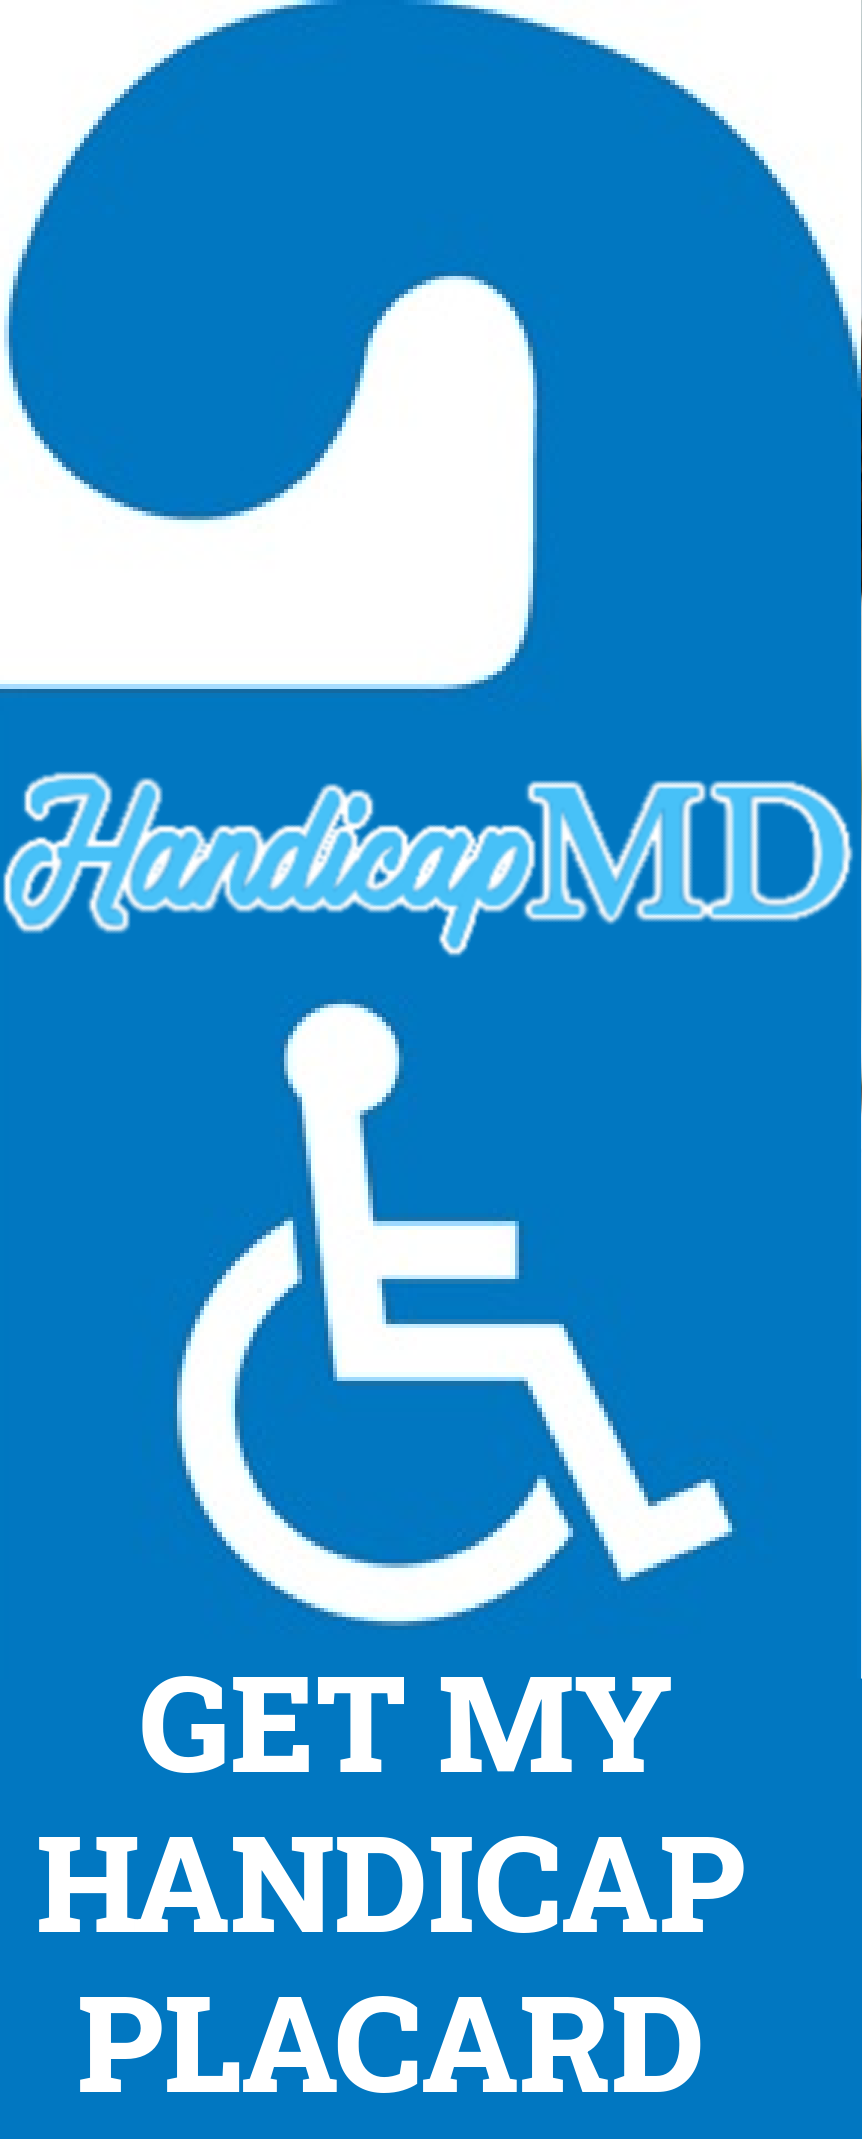 Disabled Parking Permit in Little Rock Online